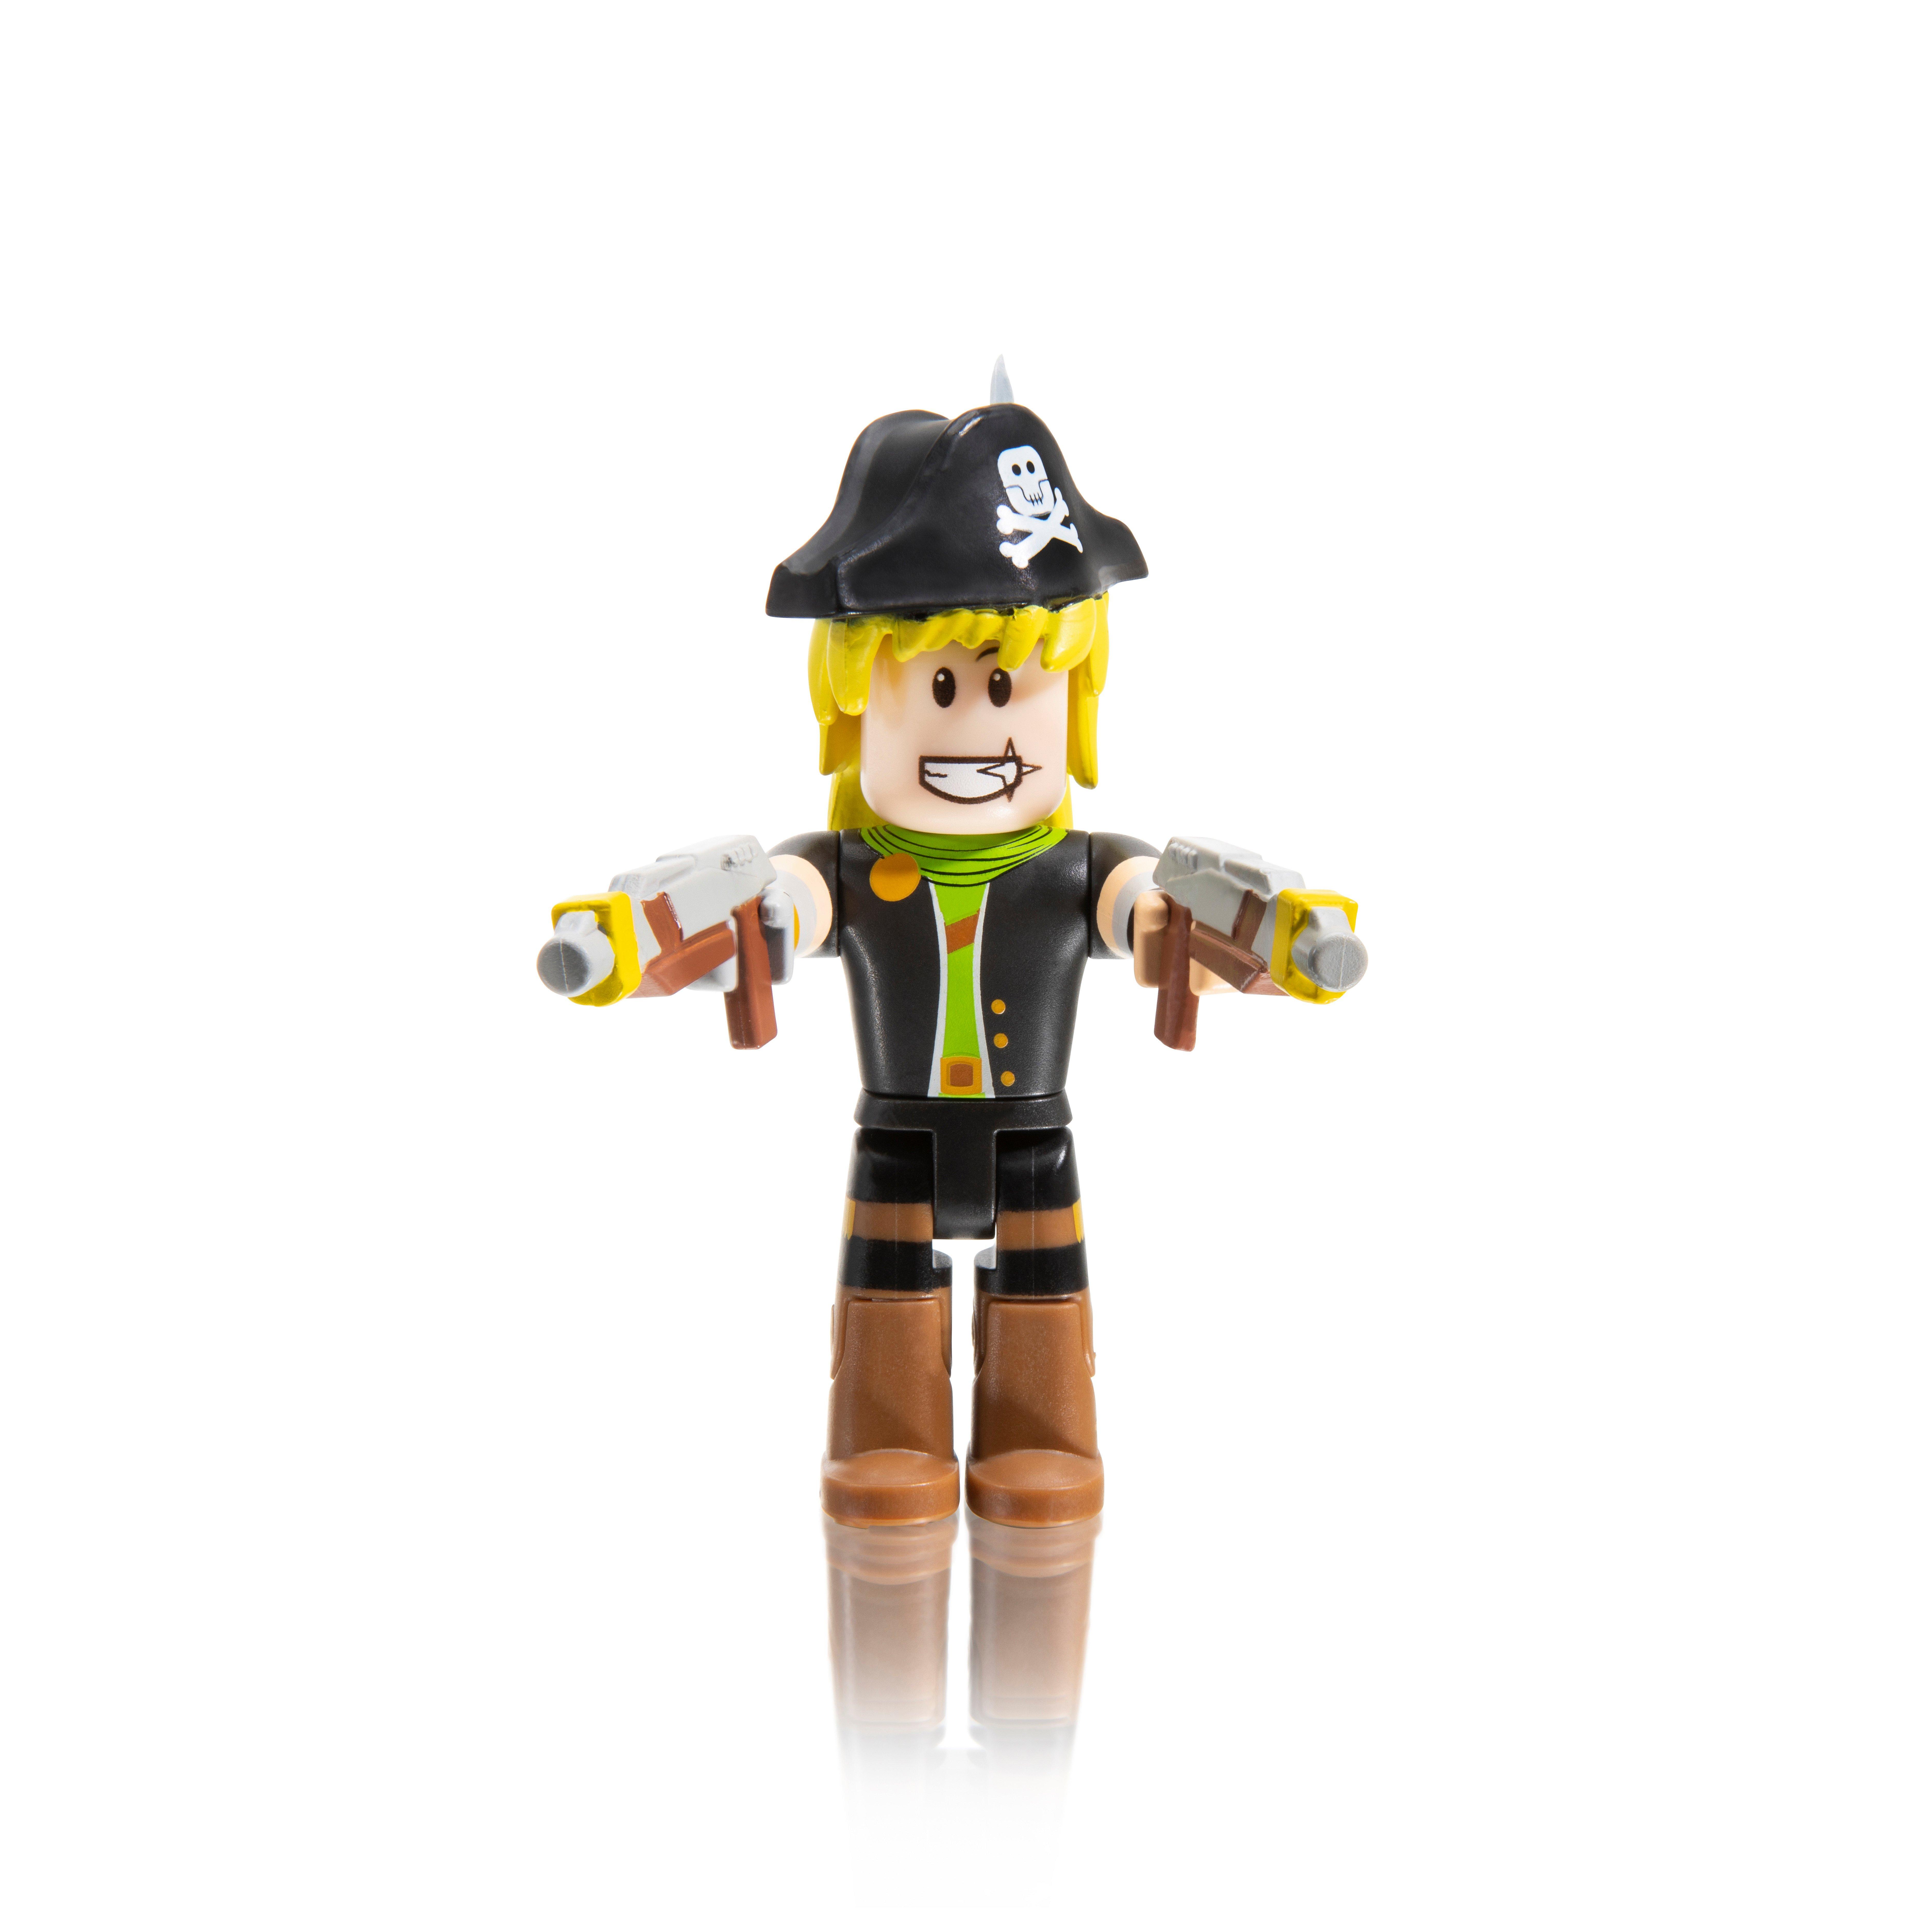 Roblox Action Collection Series 7 Mystery Figure Includes 1 Figure And Exclusive Virtual Item Gamestop - lego figure roblox